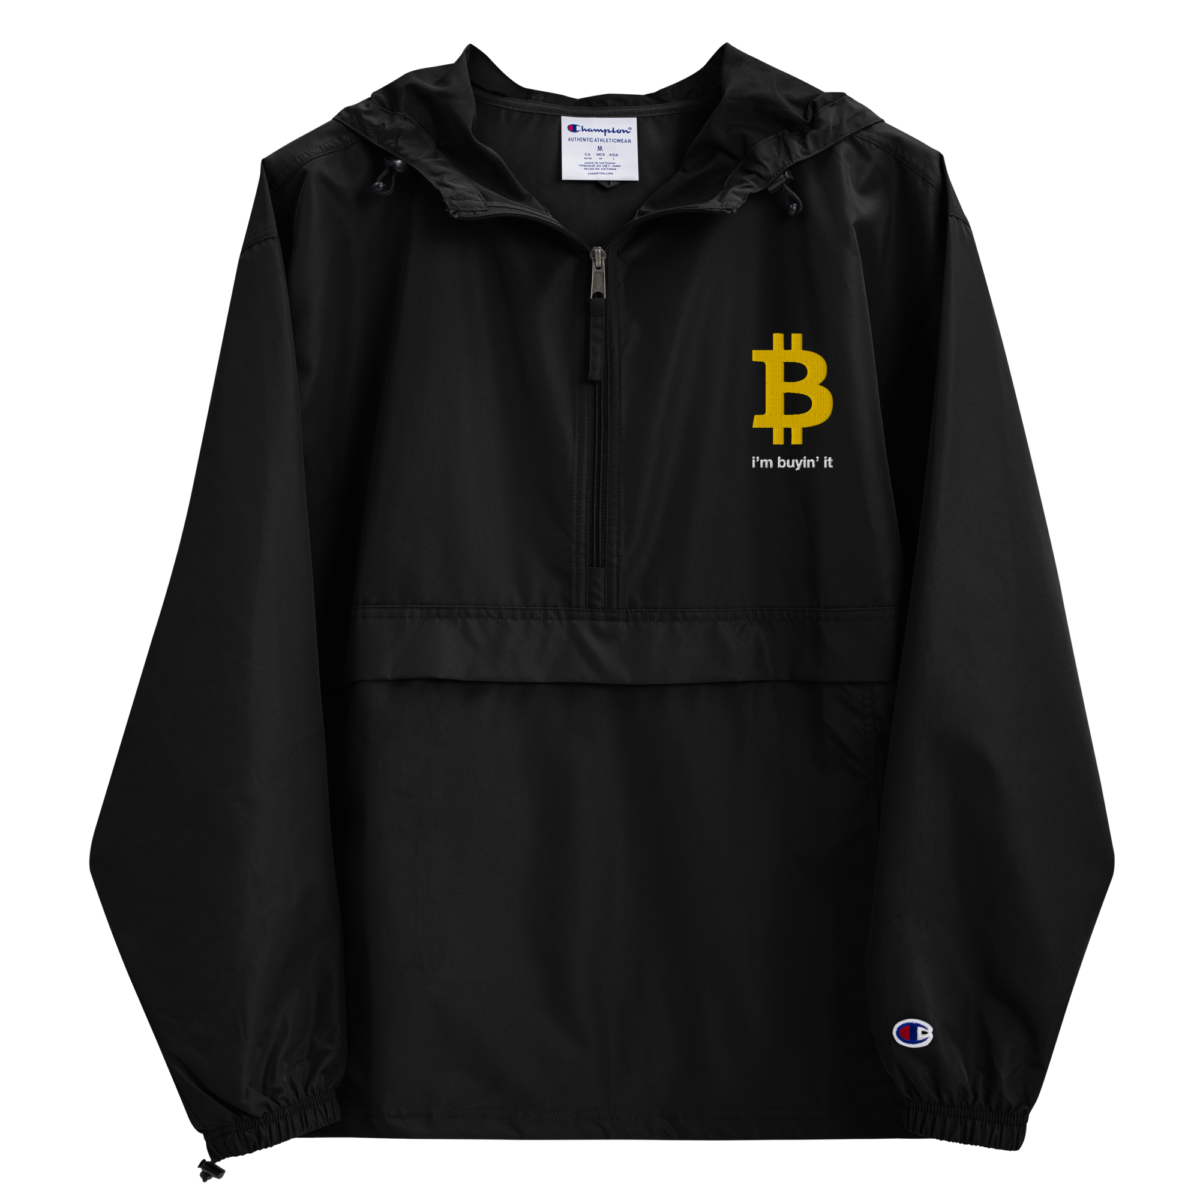 embroidered champion packable jacket black front 631f42af17eb6 - Bitcoin: I'm Buyin' It Champion Packable Jacket